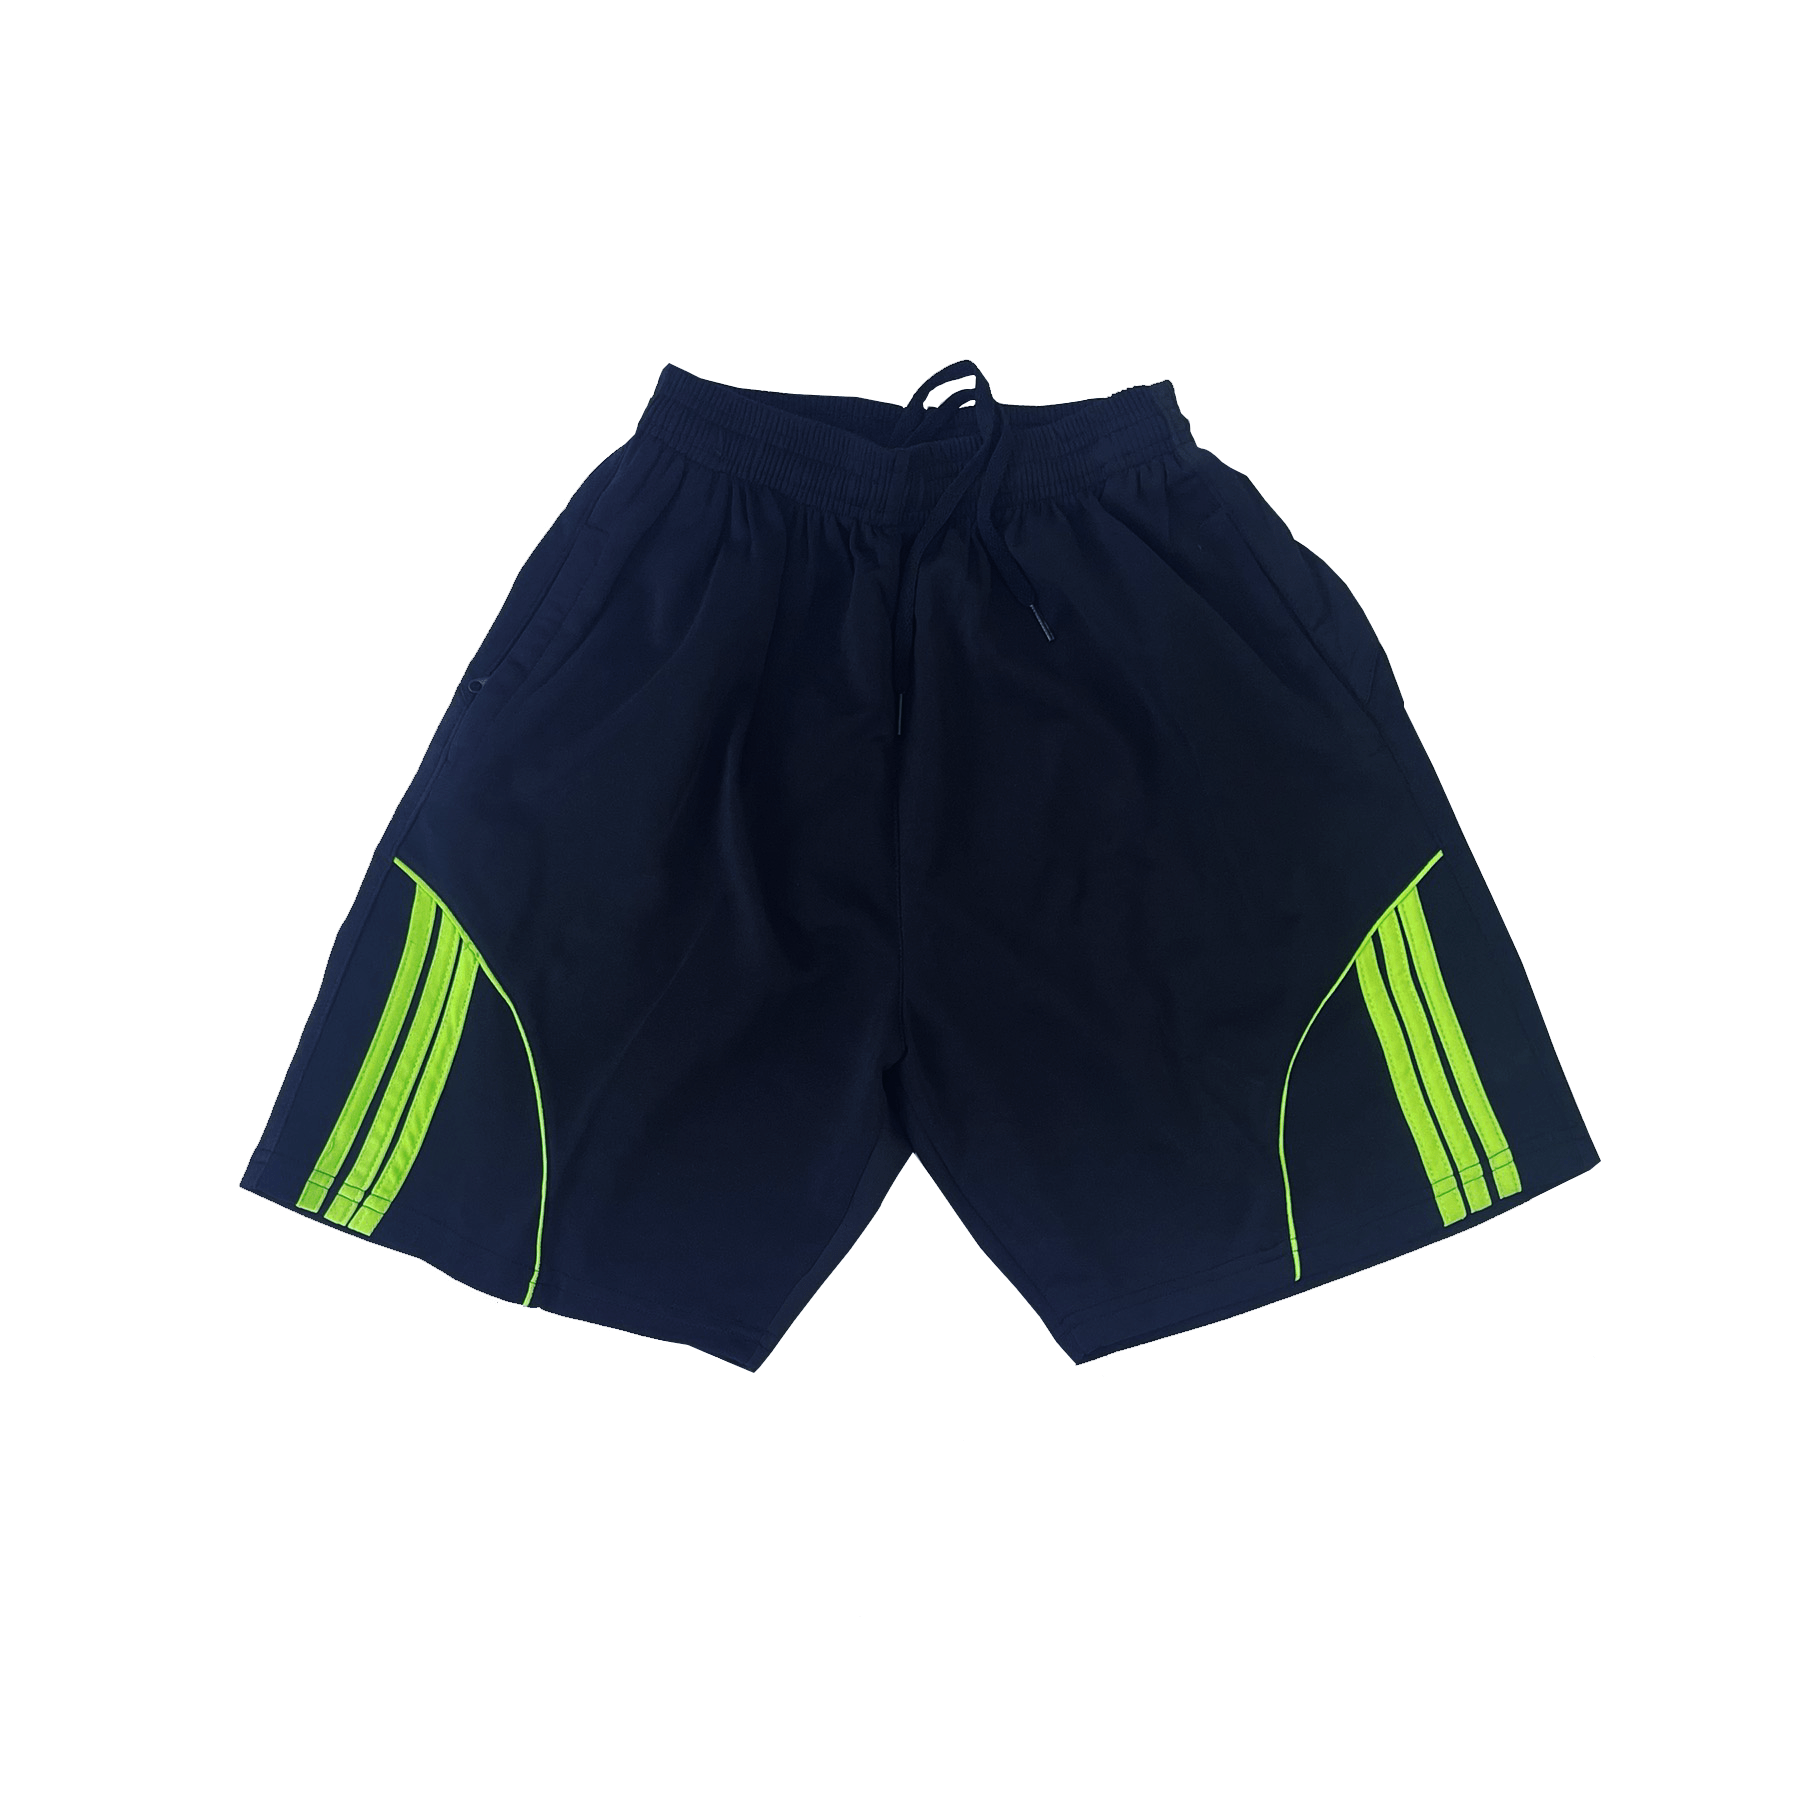  Cheap Price Men Short Pants High Quality Ready To Ship Odm Each One In Opp Bag Made In Vietnam Manufacturer